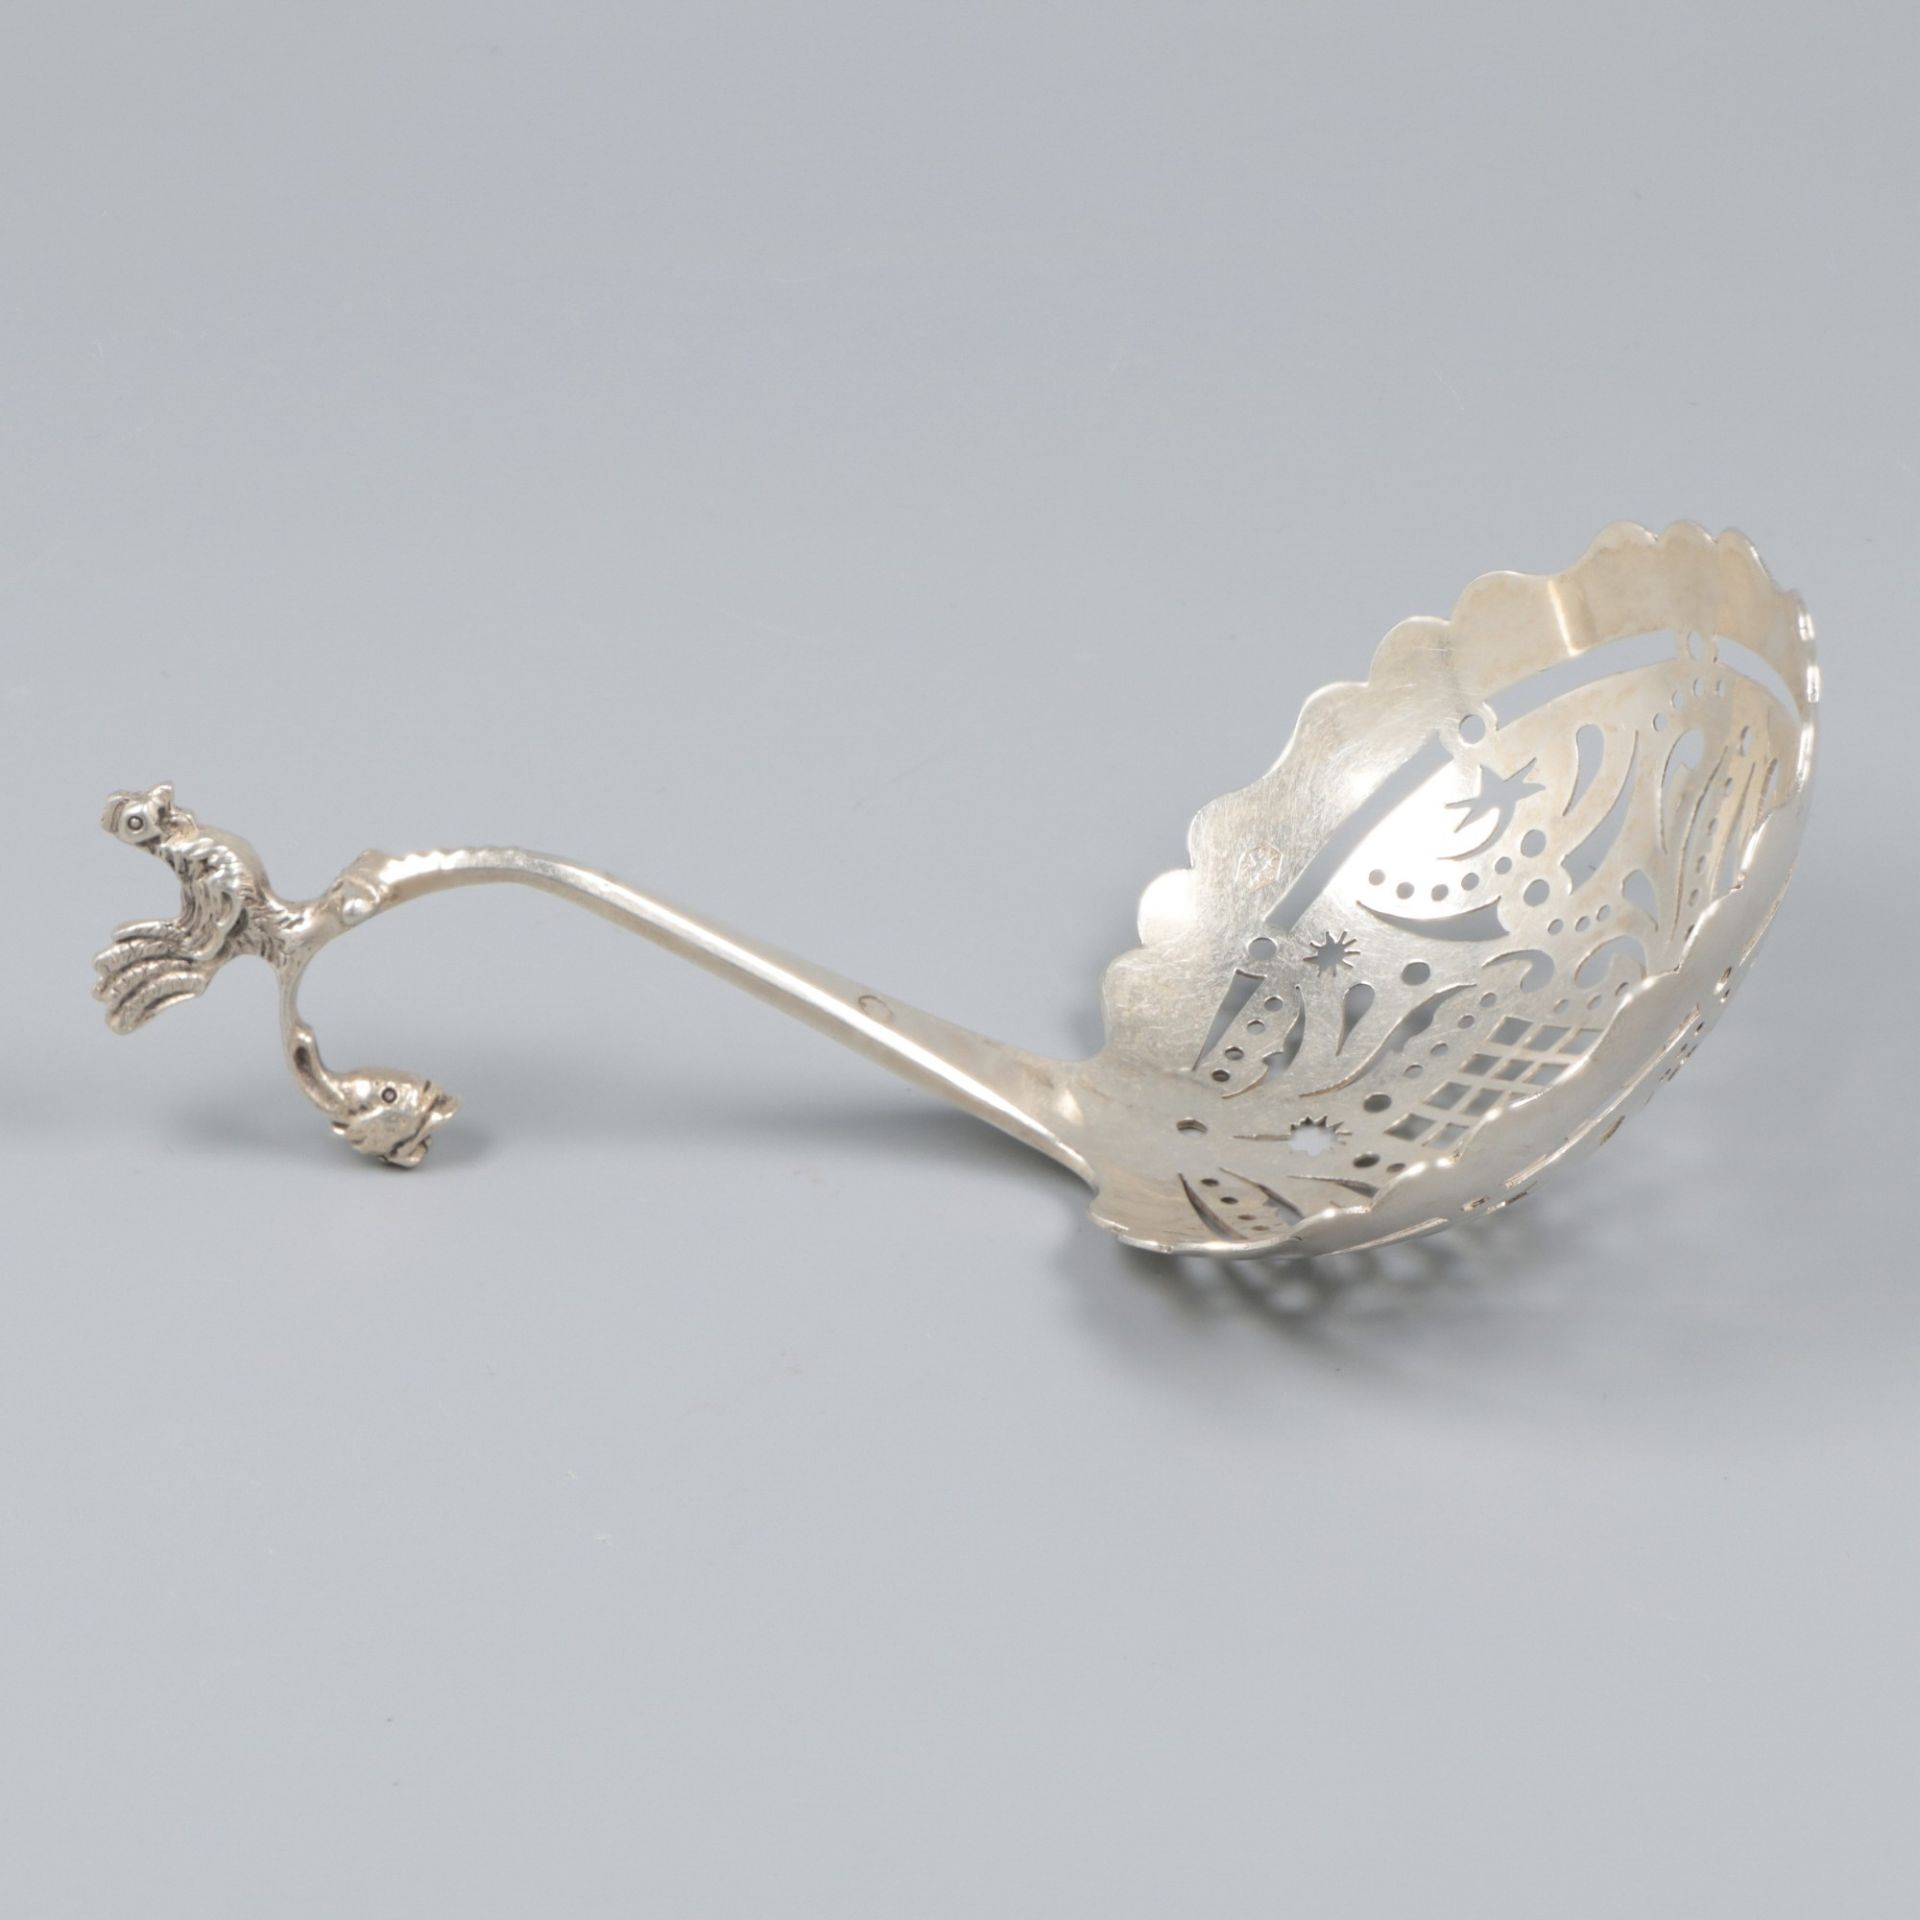 Silver sifter spoon. - Image 3 of 6